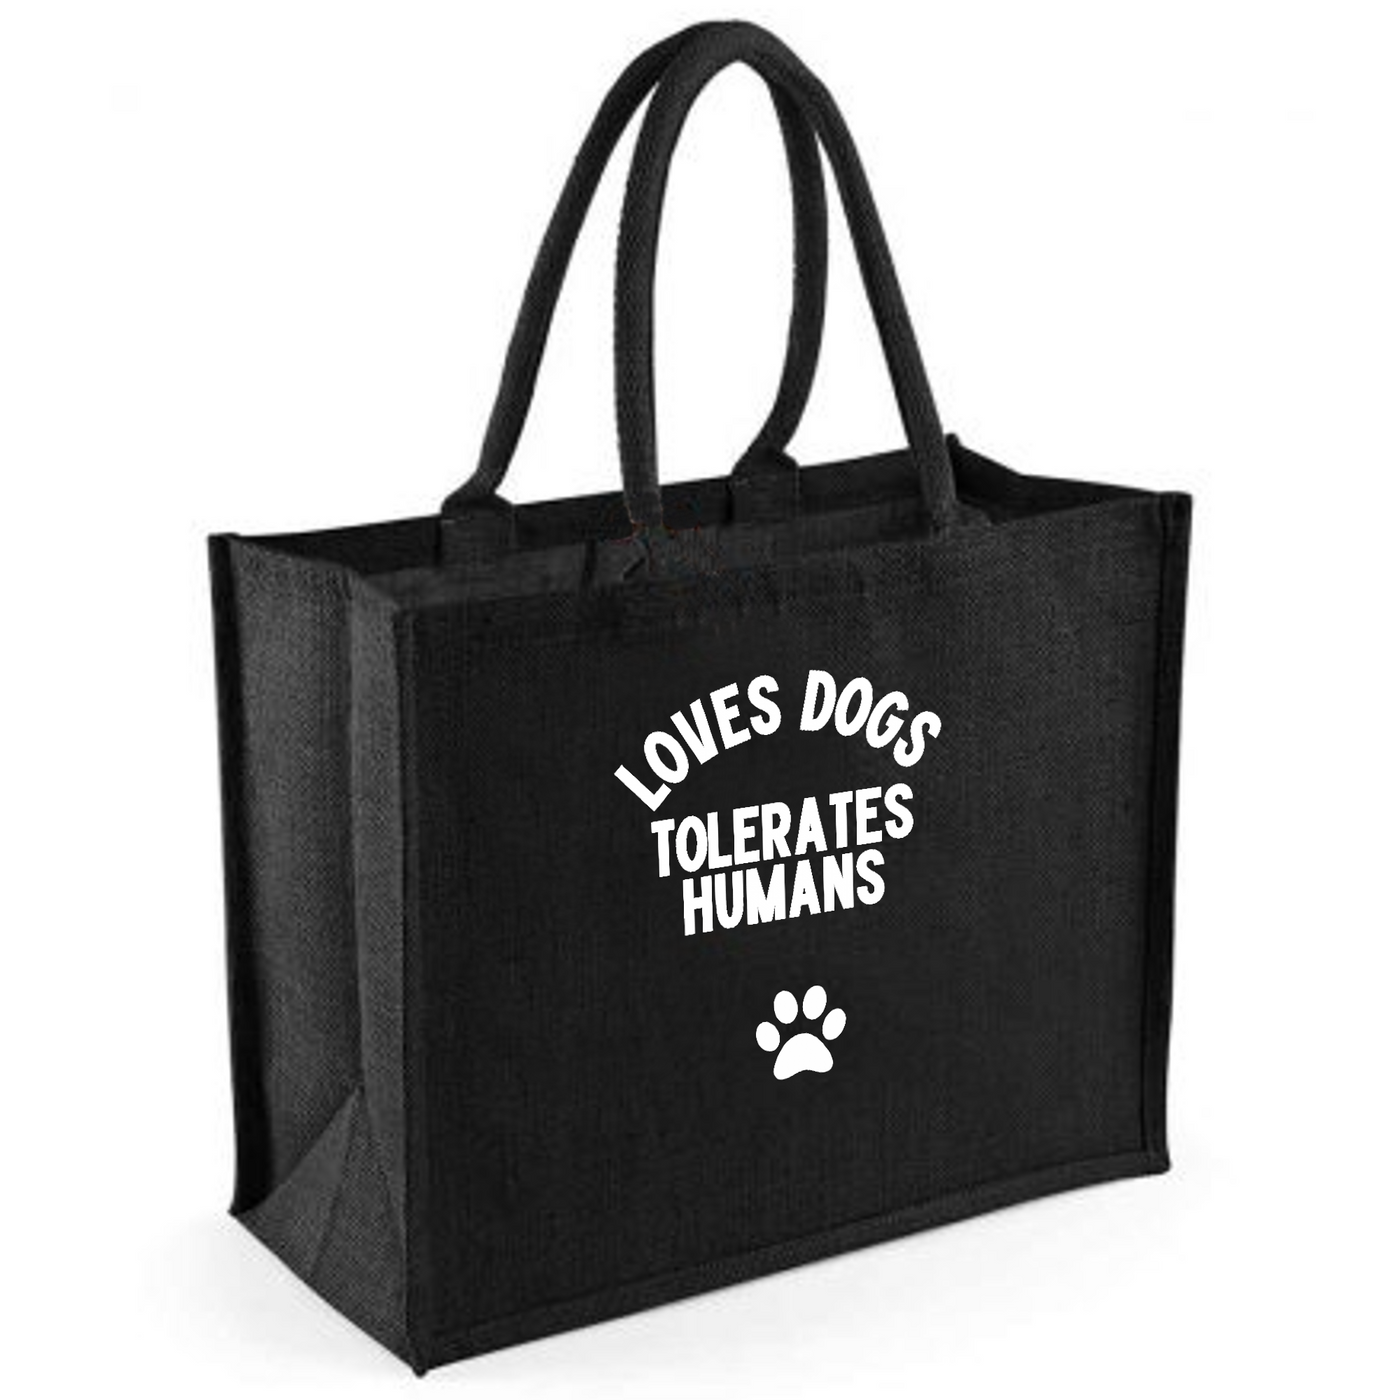 Loves Dogs, Tolerates Humans - Tote Bag